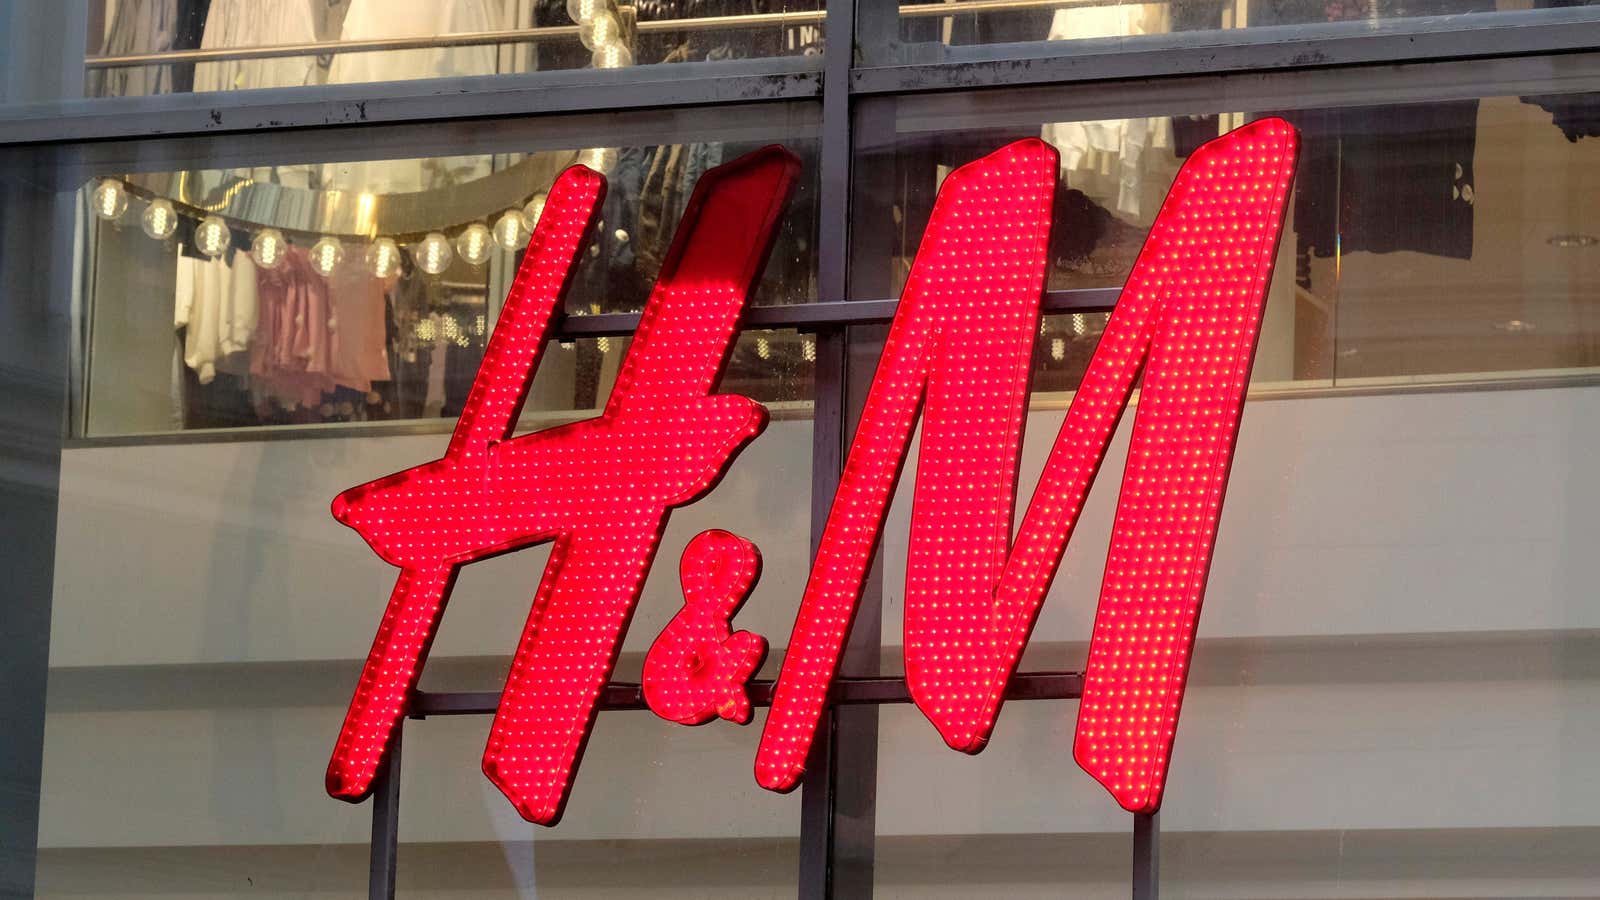 H&M responds to a firestorm in China over Xinjiang cotton. - The